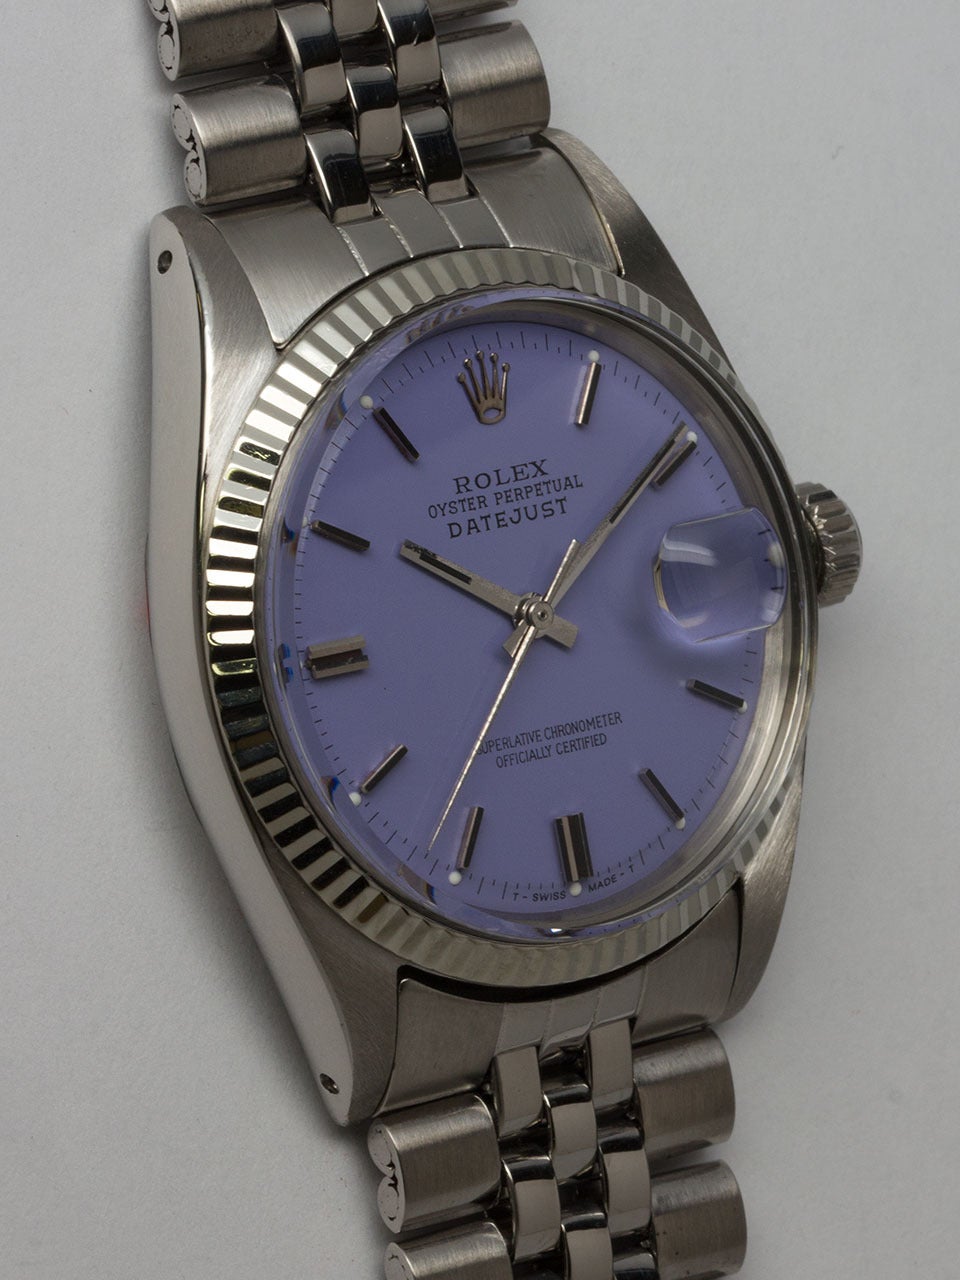 Rolex Stainless Steel Datejust Wristwatch ref 1601 serial #1.5 million circa 1967. 36mm diameter case with 14K white gold fluted bezel and acrylic crystal. Lovely custom colored Lilac dial with applied silver indexes and silver baton hands. Powered